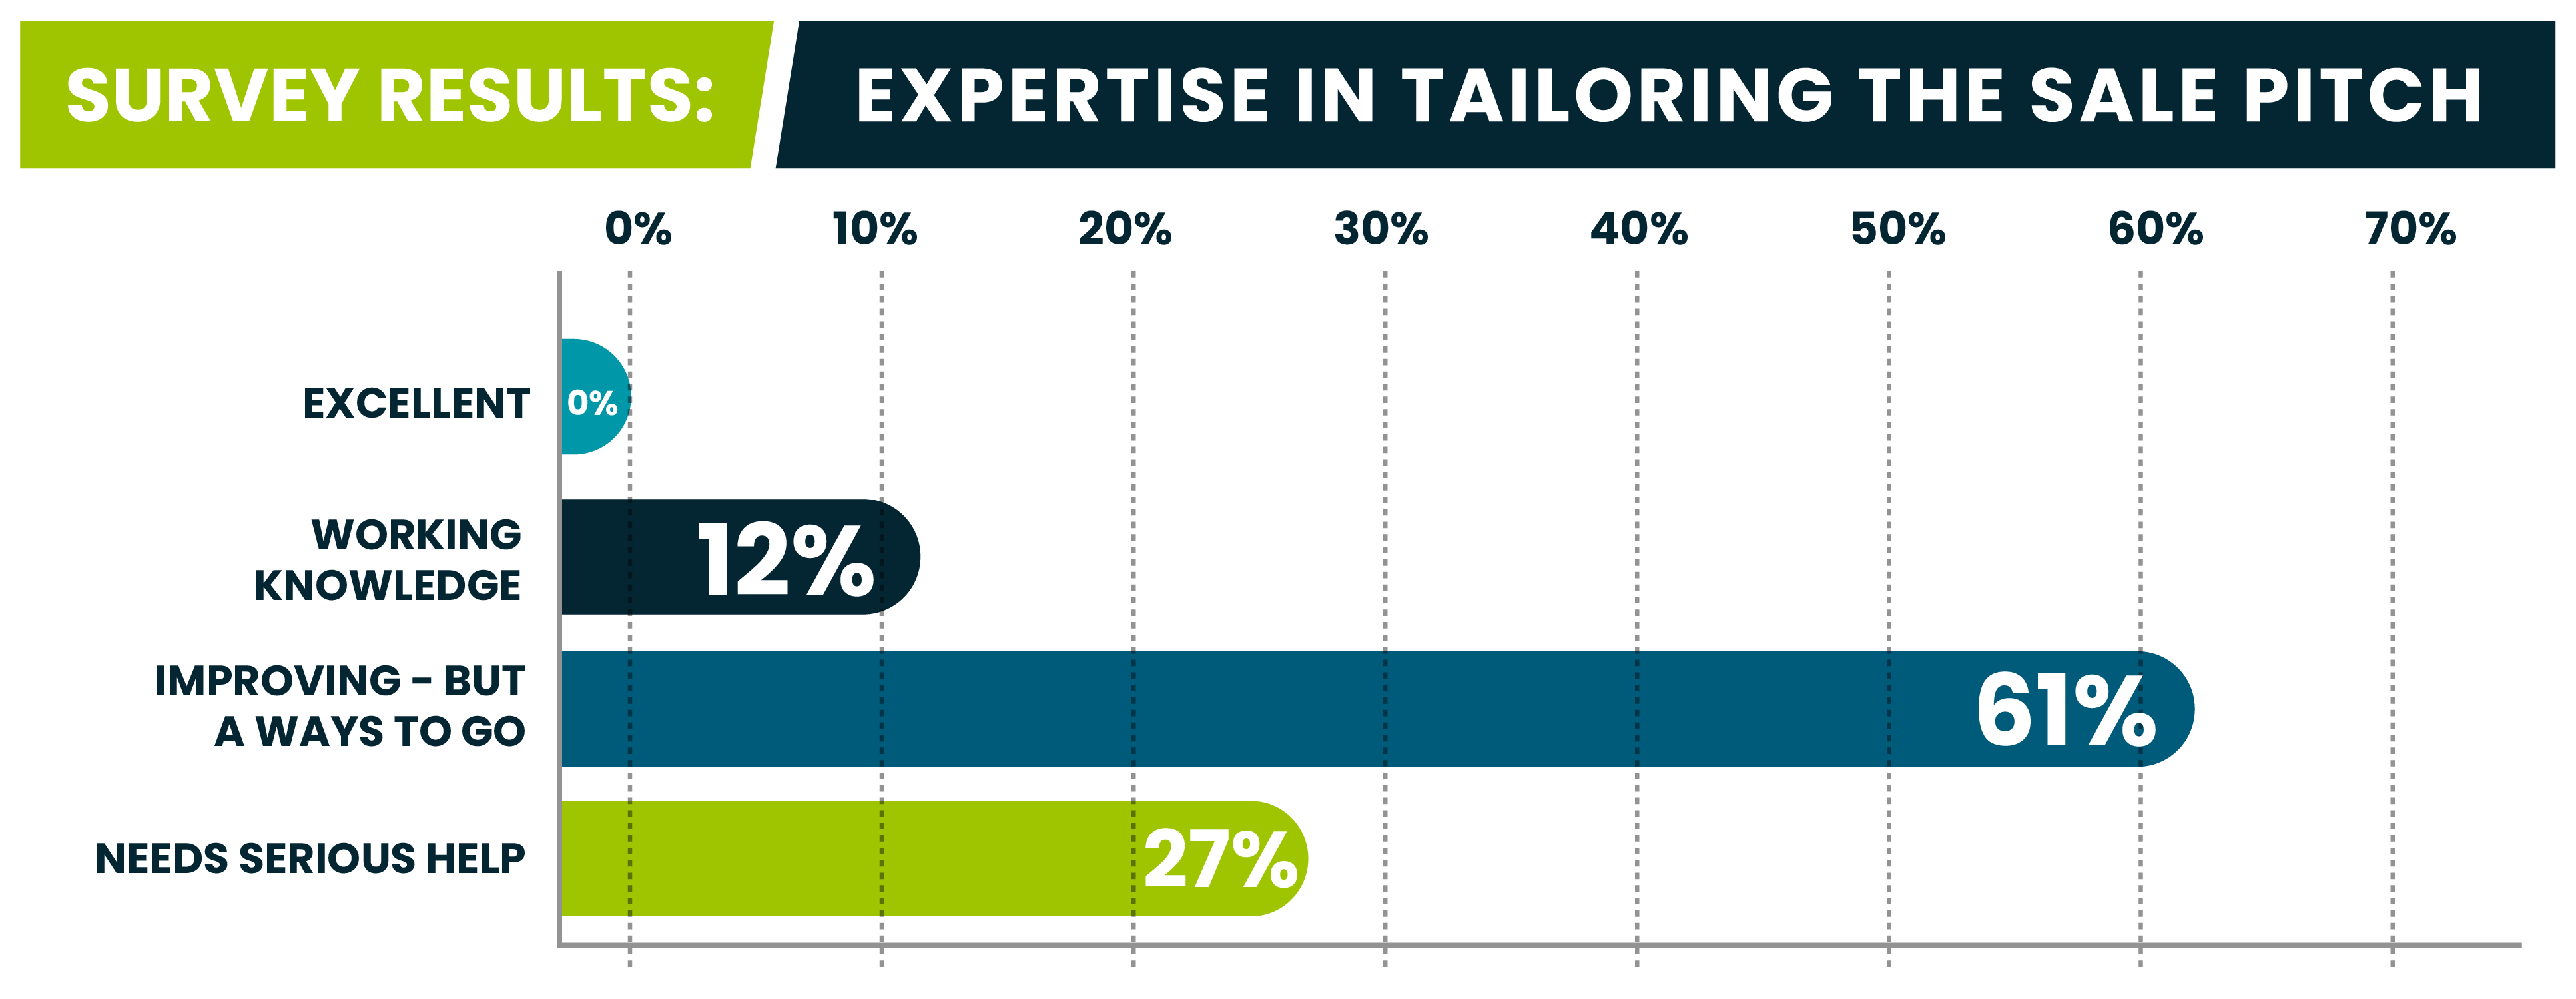 "Survey Results: Expertise in tailoring the sales pitch. Excellent - 0%; Working Knowledge - 12%; Improving - but a ways to go - 61%; Needs serious help - 27%"